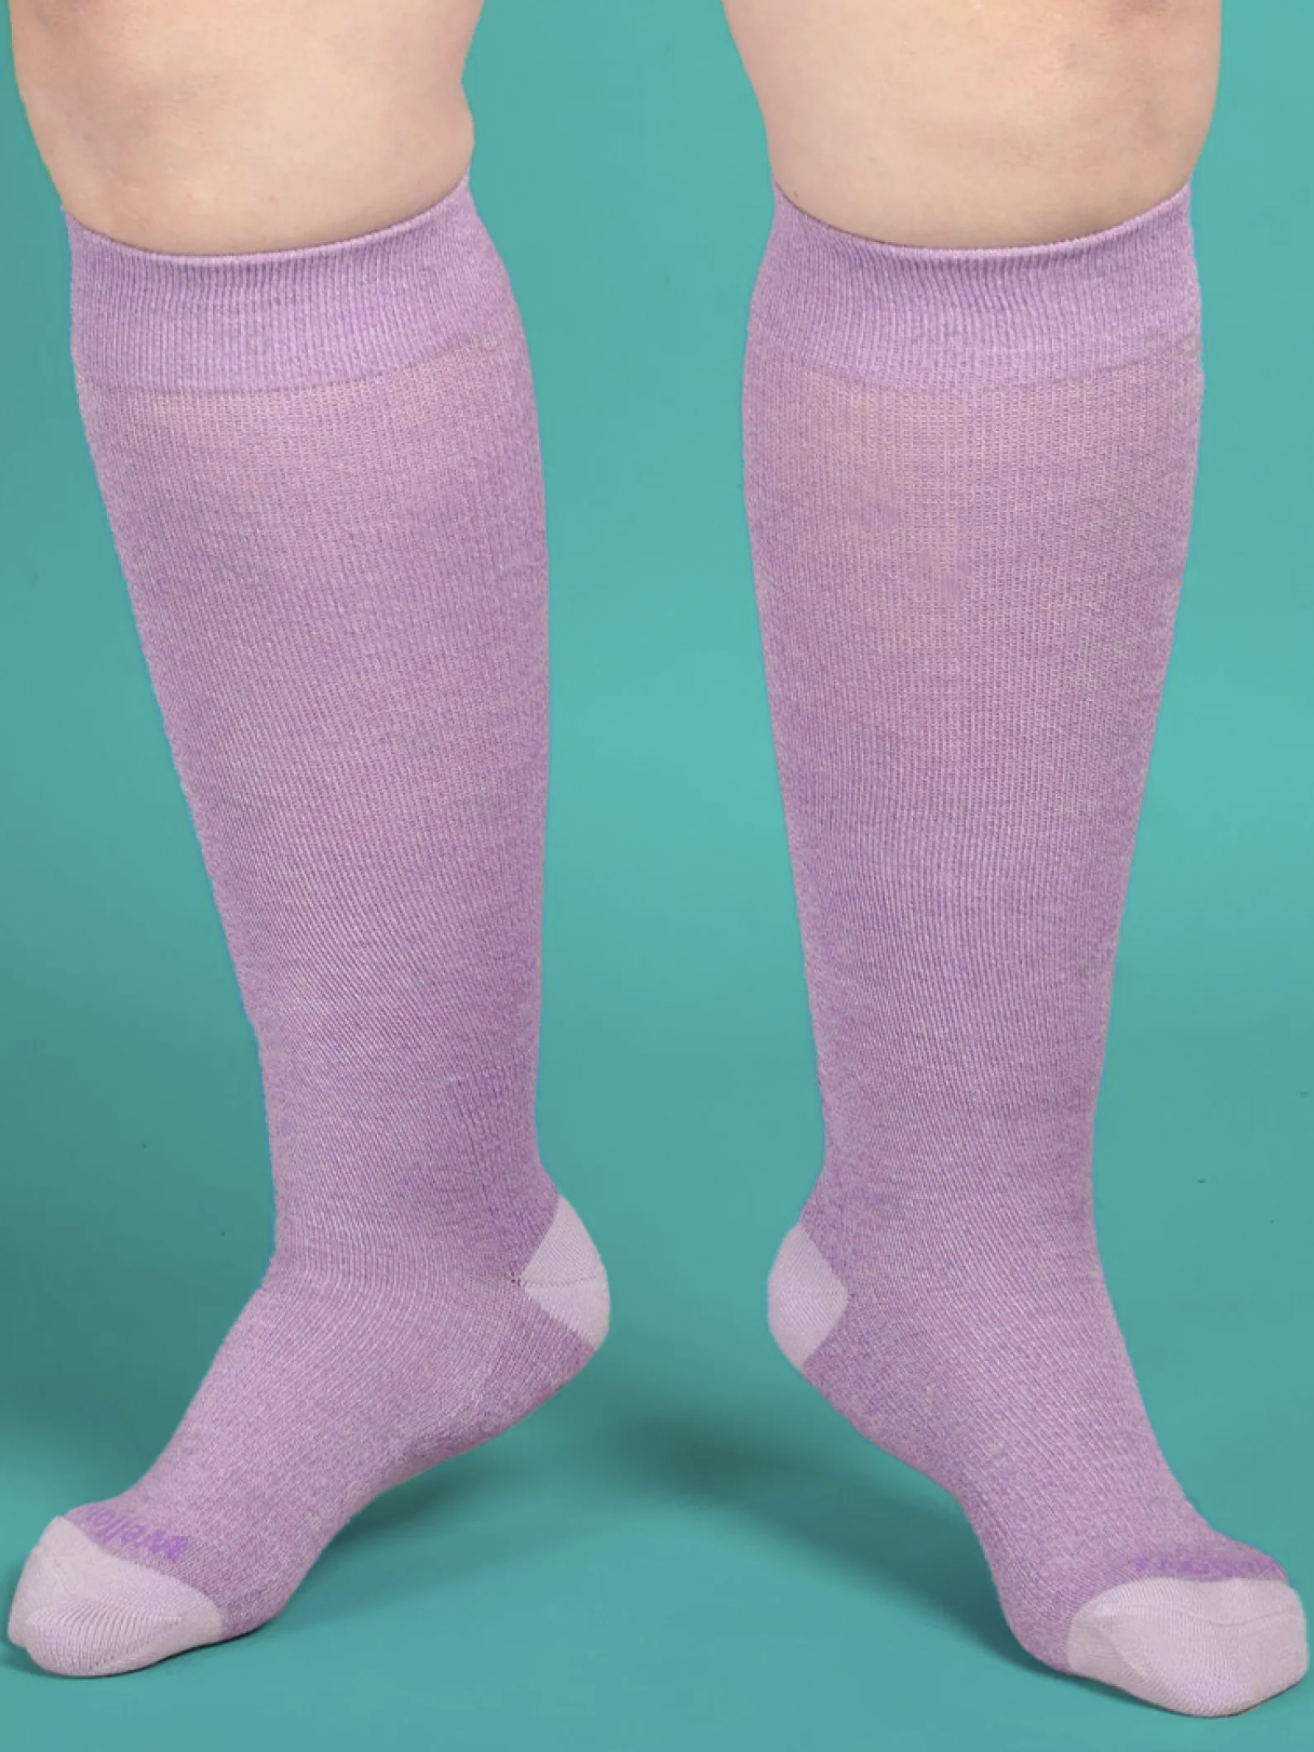 A person standing against a teal background, wearing purple knee-high compression socks.